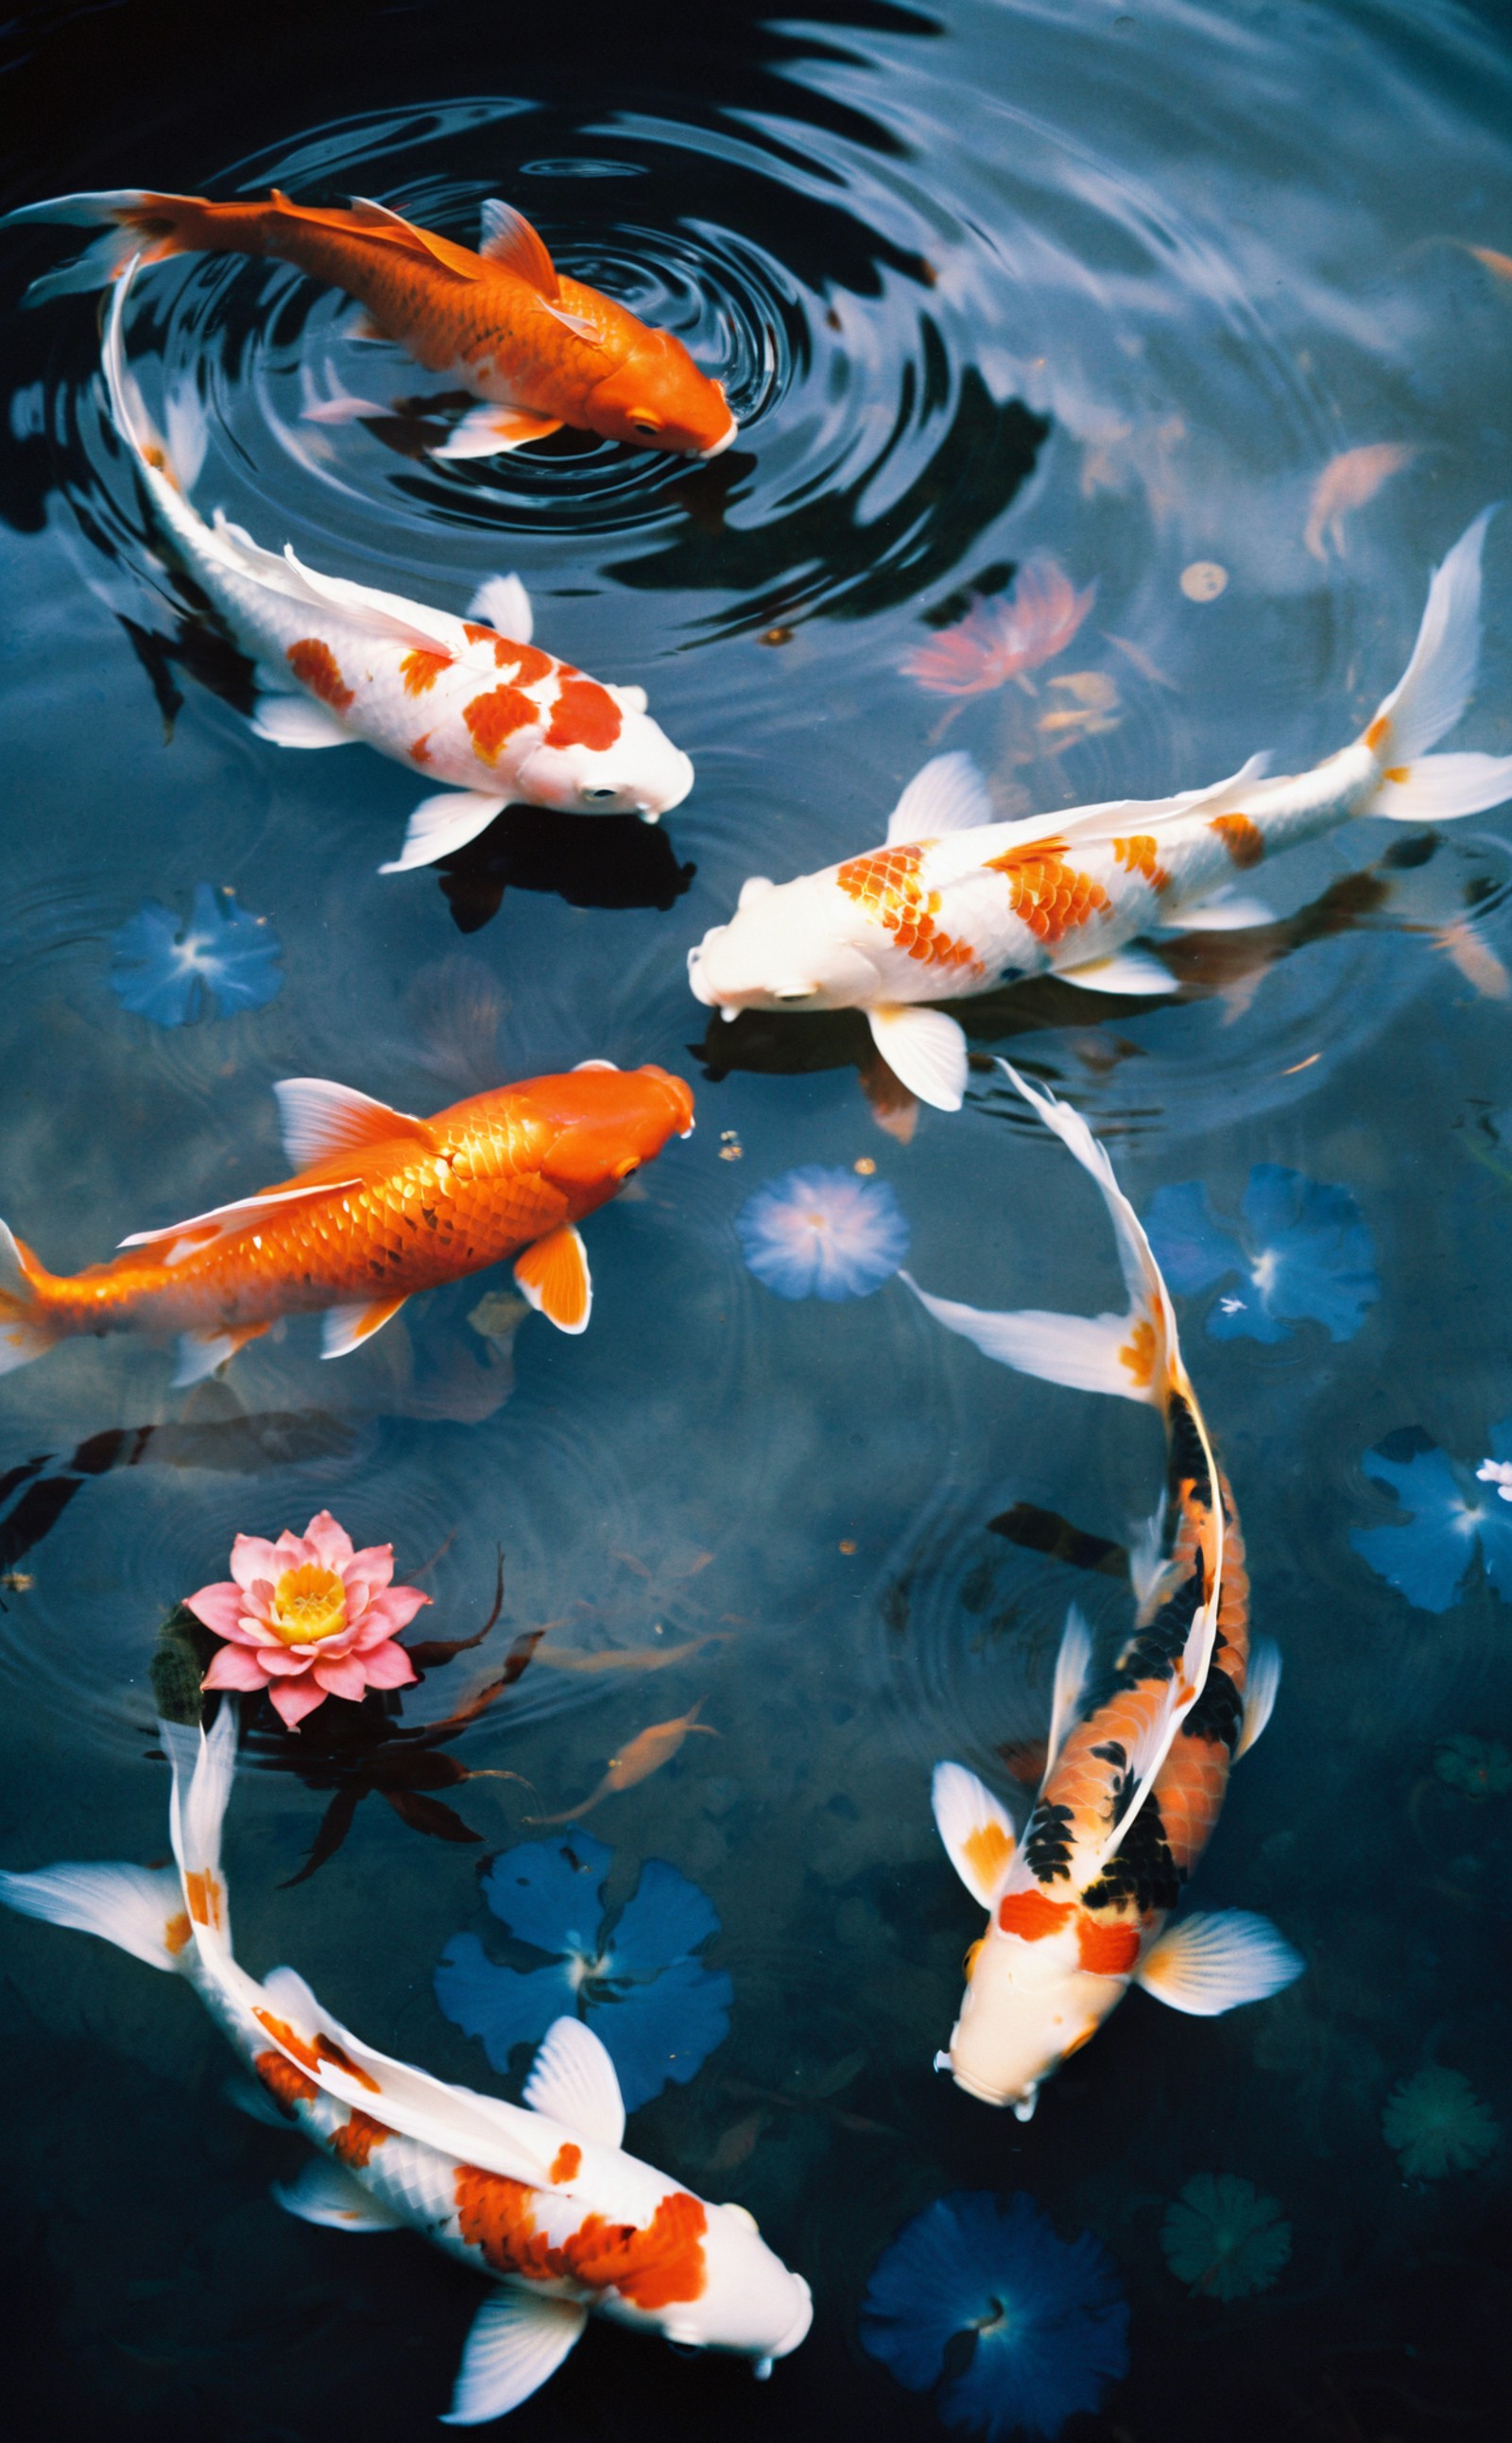 film photography aesthetic,Artistic painting depicting koi fish, swirling water conveying motion, cloudy ethereal backgrou...